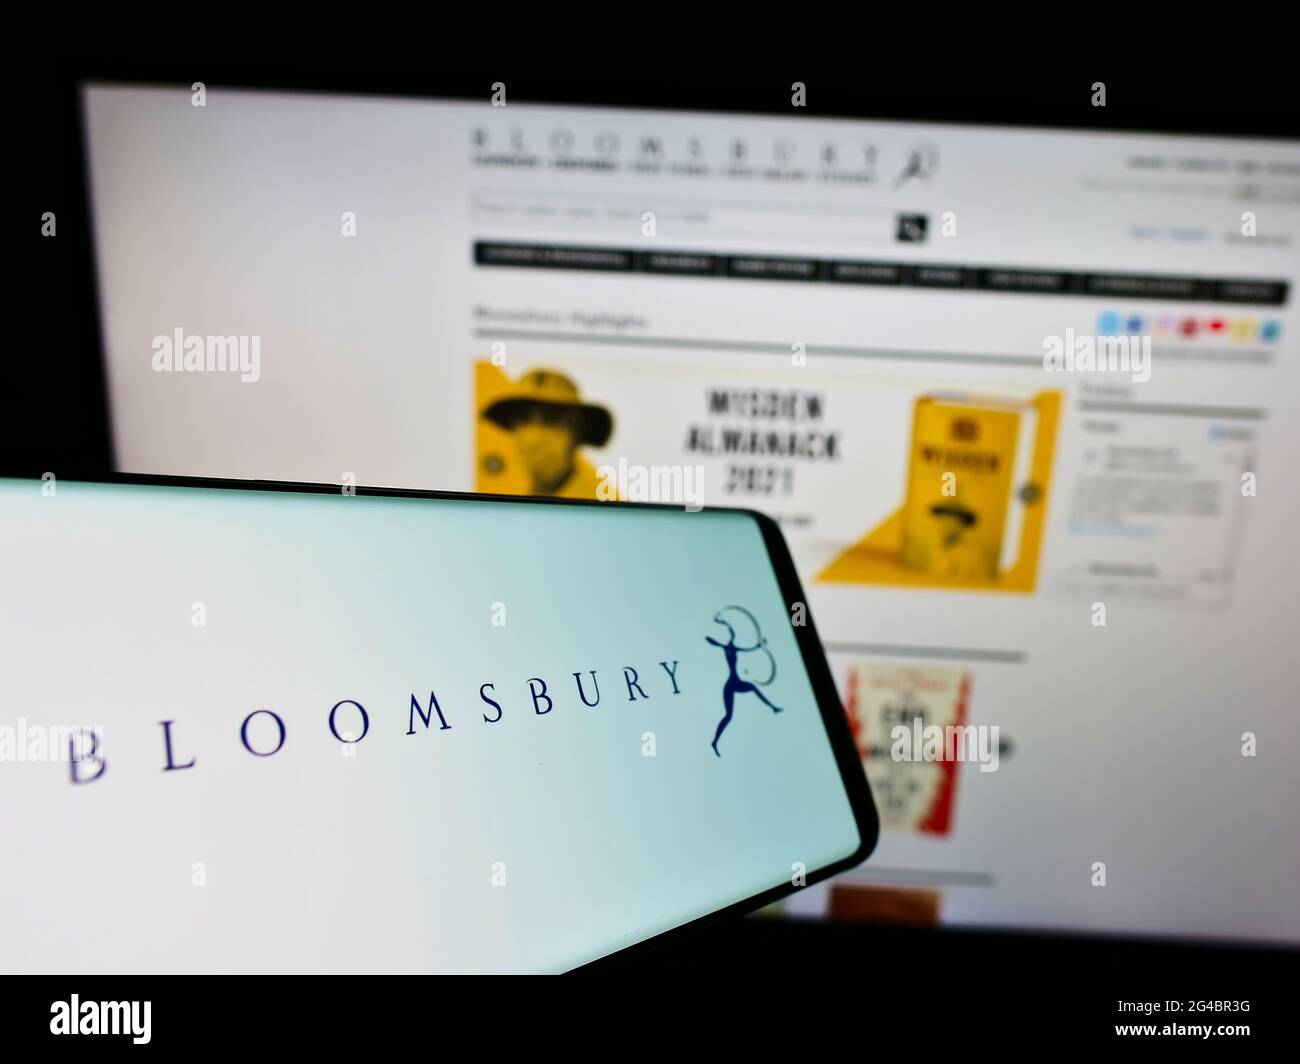 Smartphone with logo of British publisher Bloomsbury Publishing plc on screen in front of business website. Focus on center-right of phone display. Stock Photo